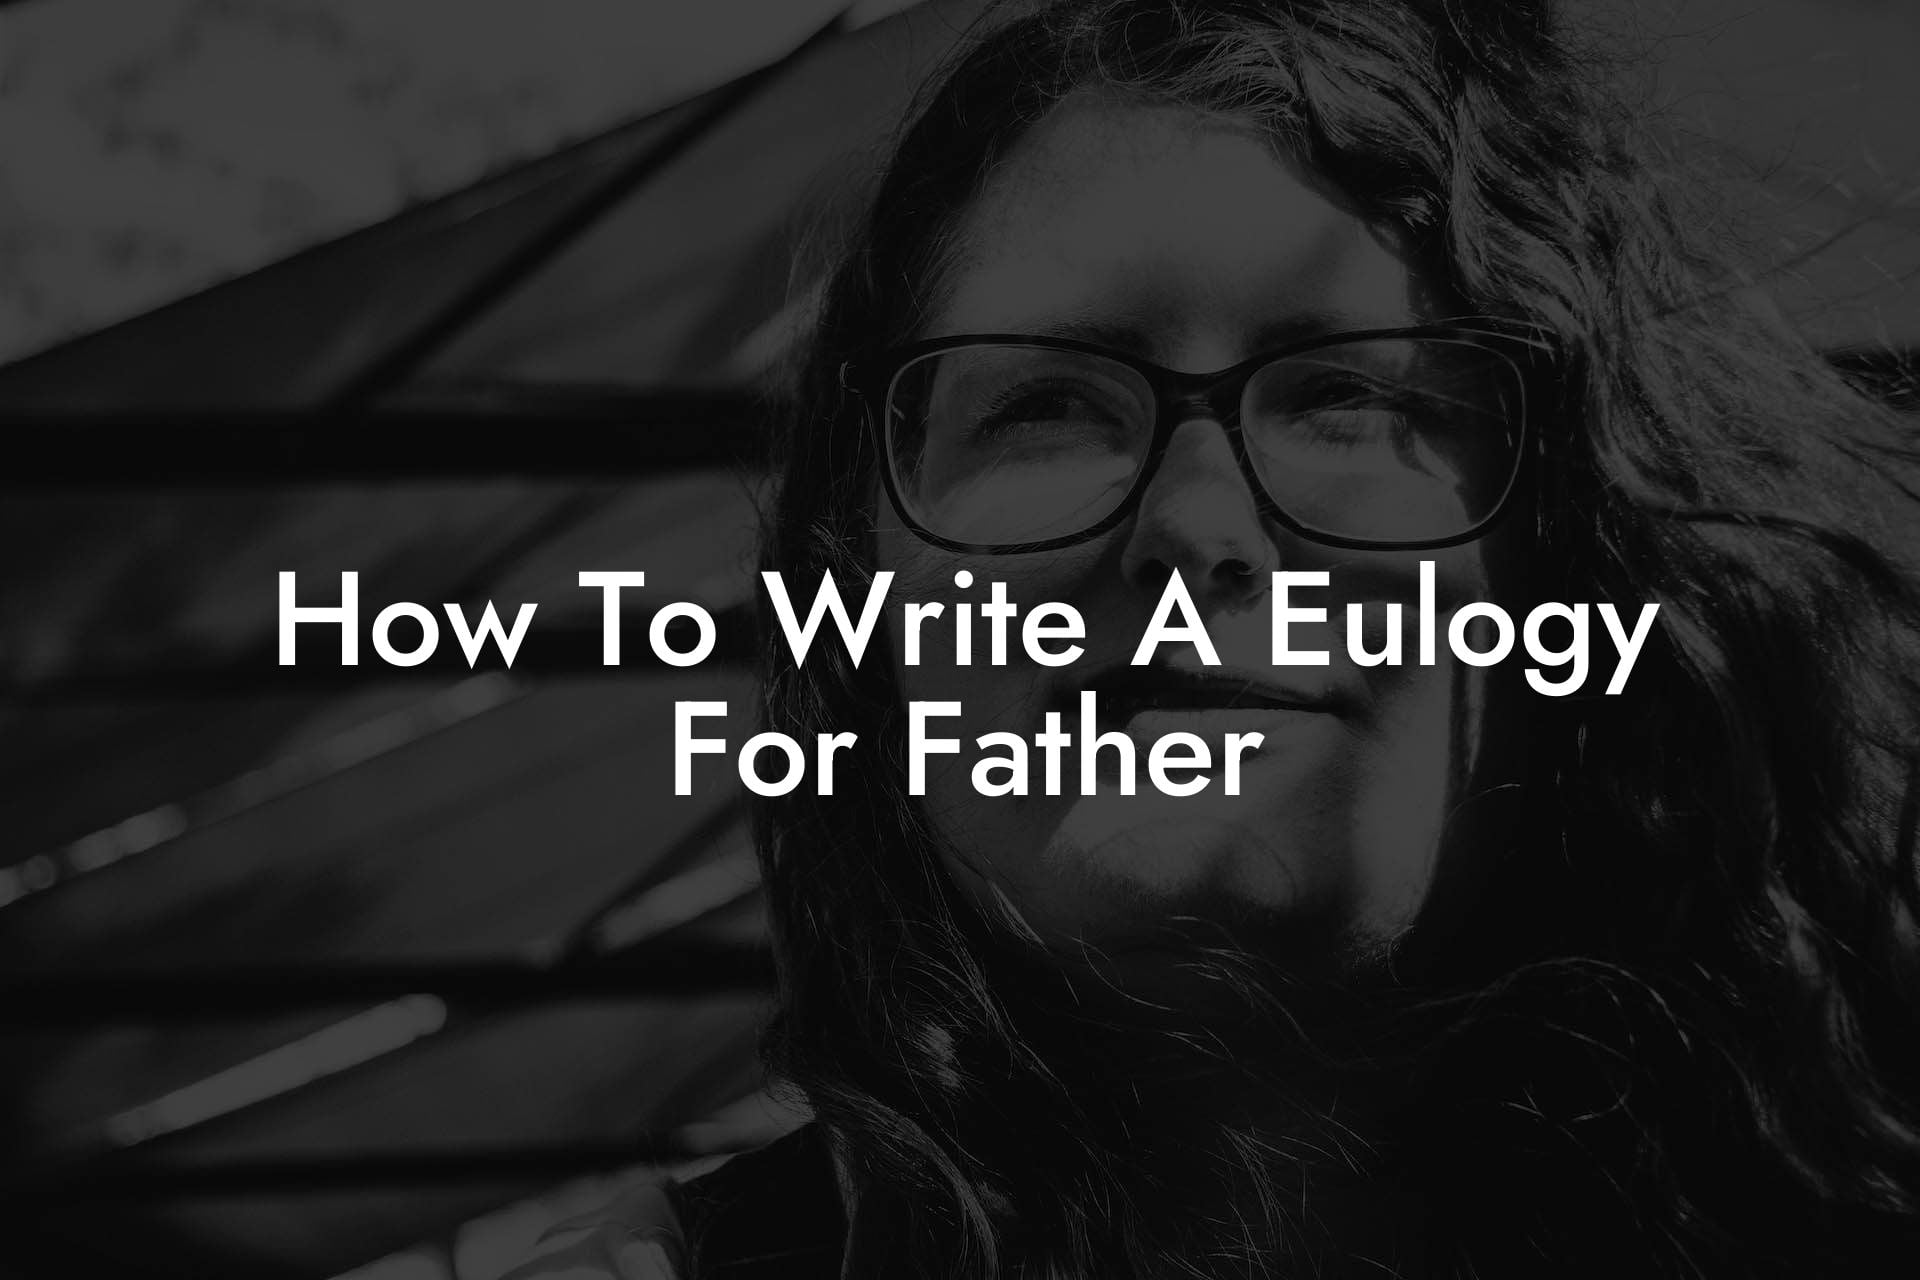 How To Write A Eulogy For Father'